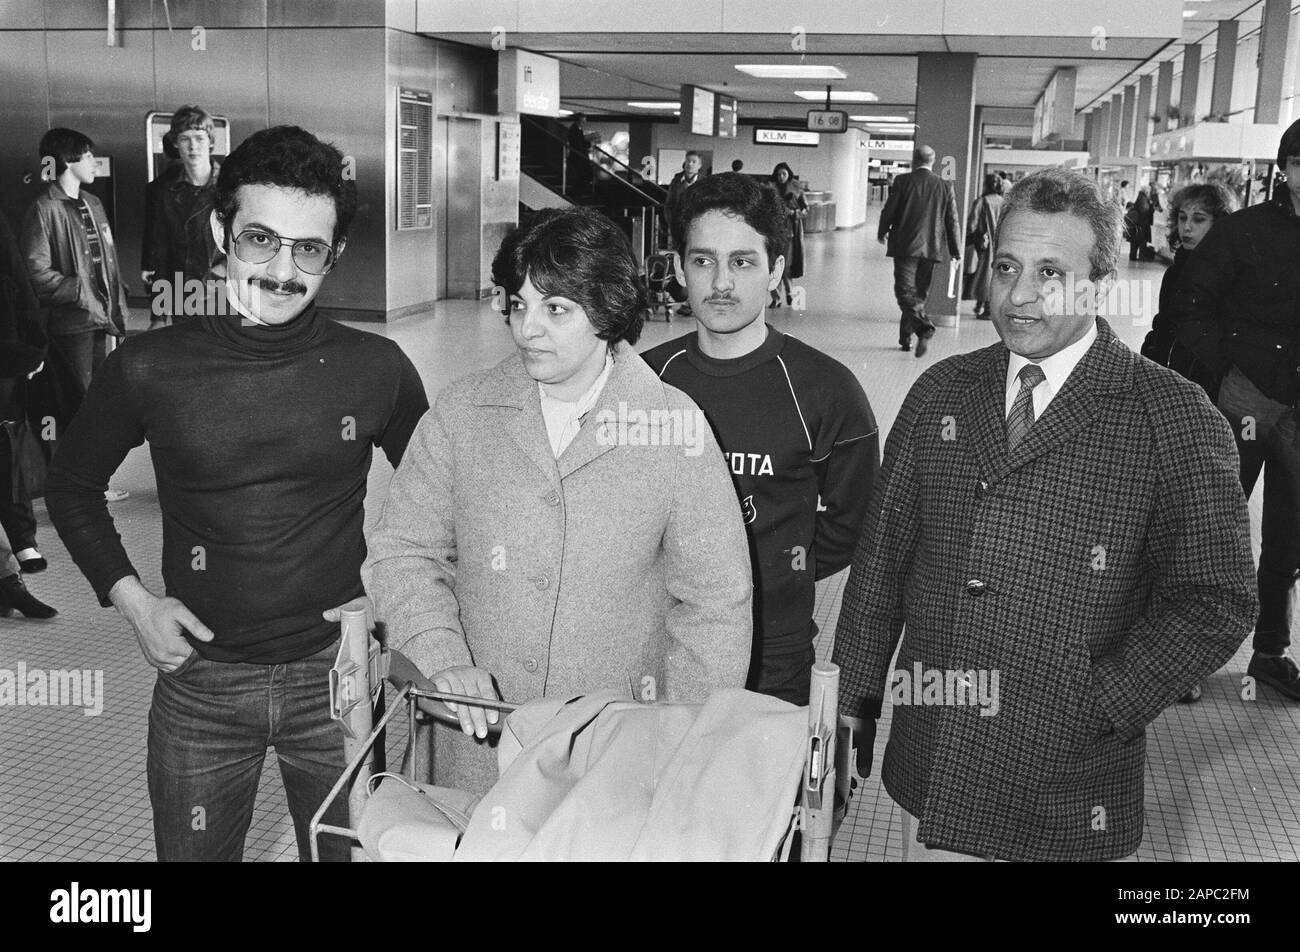 17-year-old Student of Montessor-lyceum the Iranian Said Abbassi still out of the country despite actions of fellow students Date: 29 March 1982 Location: Noord-Holland, Schiphol Keywords: DEVELOPT, pupils Personal Name: Abbassi, Said Stock Photo